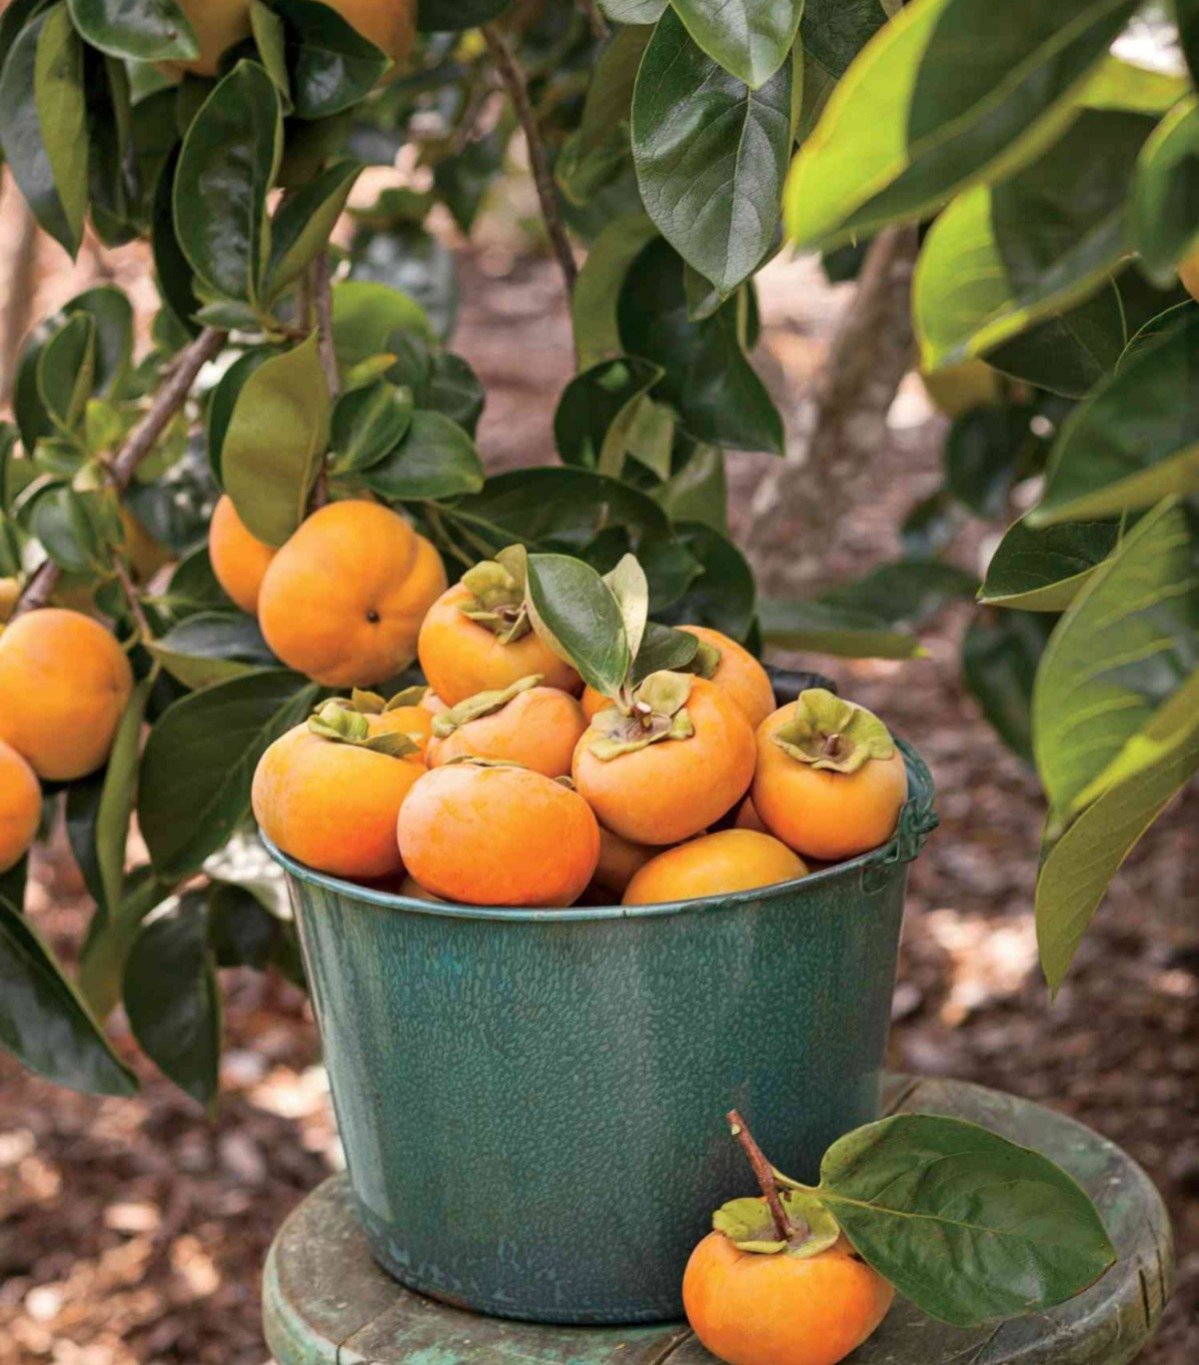 A bucket of Oriental Persimmon oranges hanging on a tree branch, ready to be harvested.

